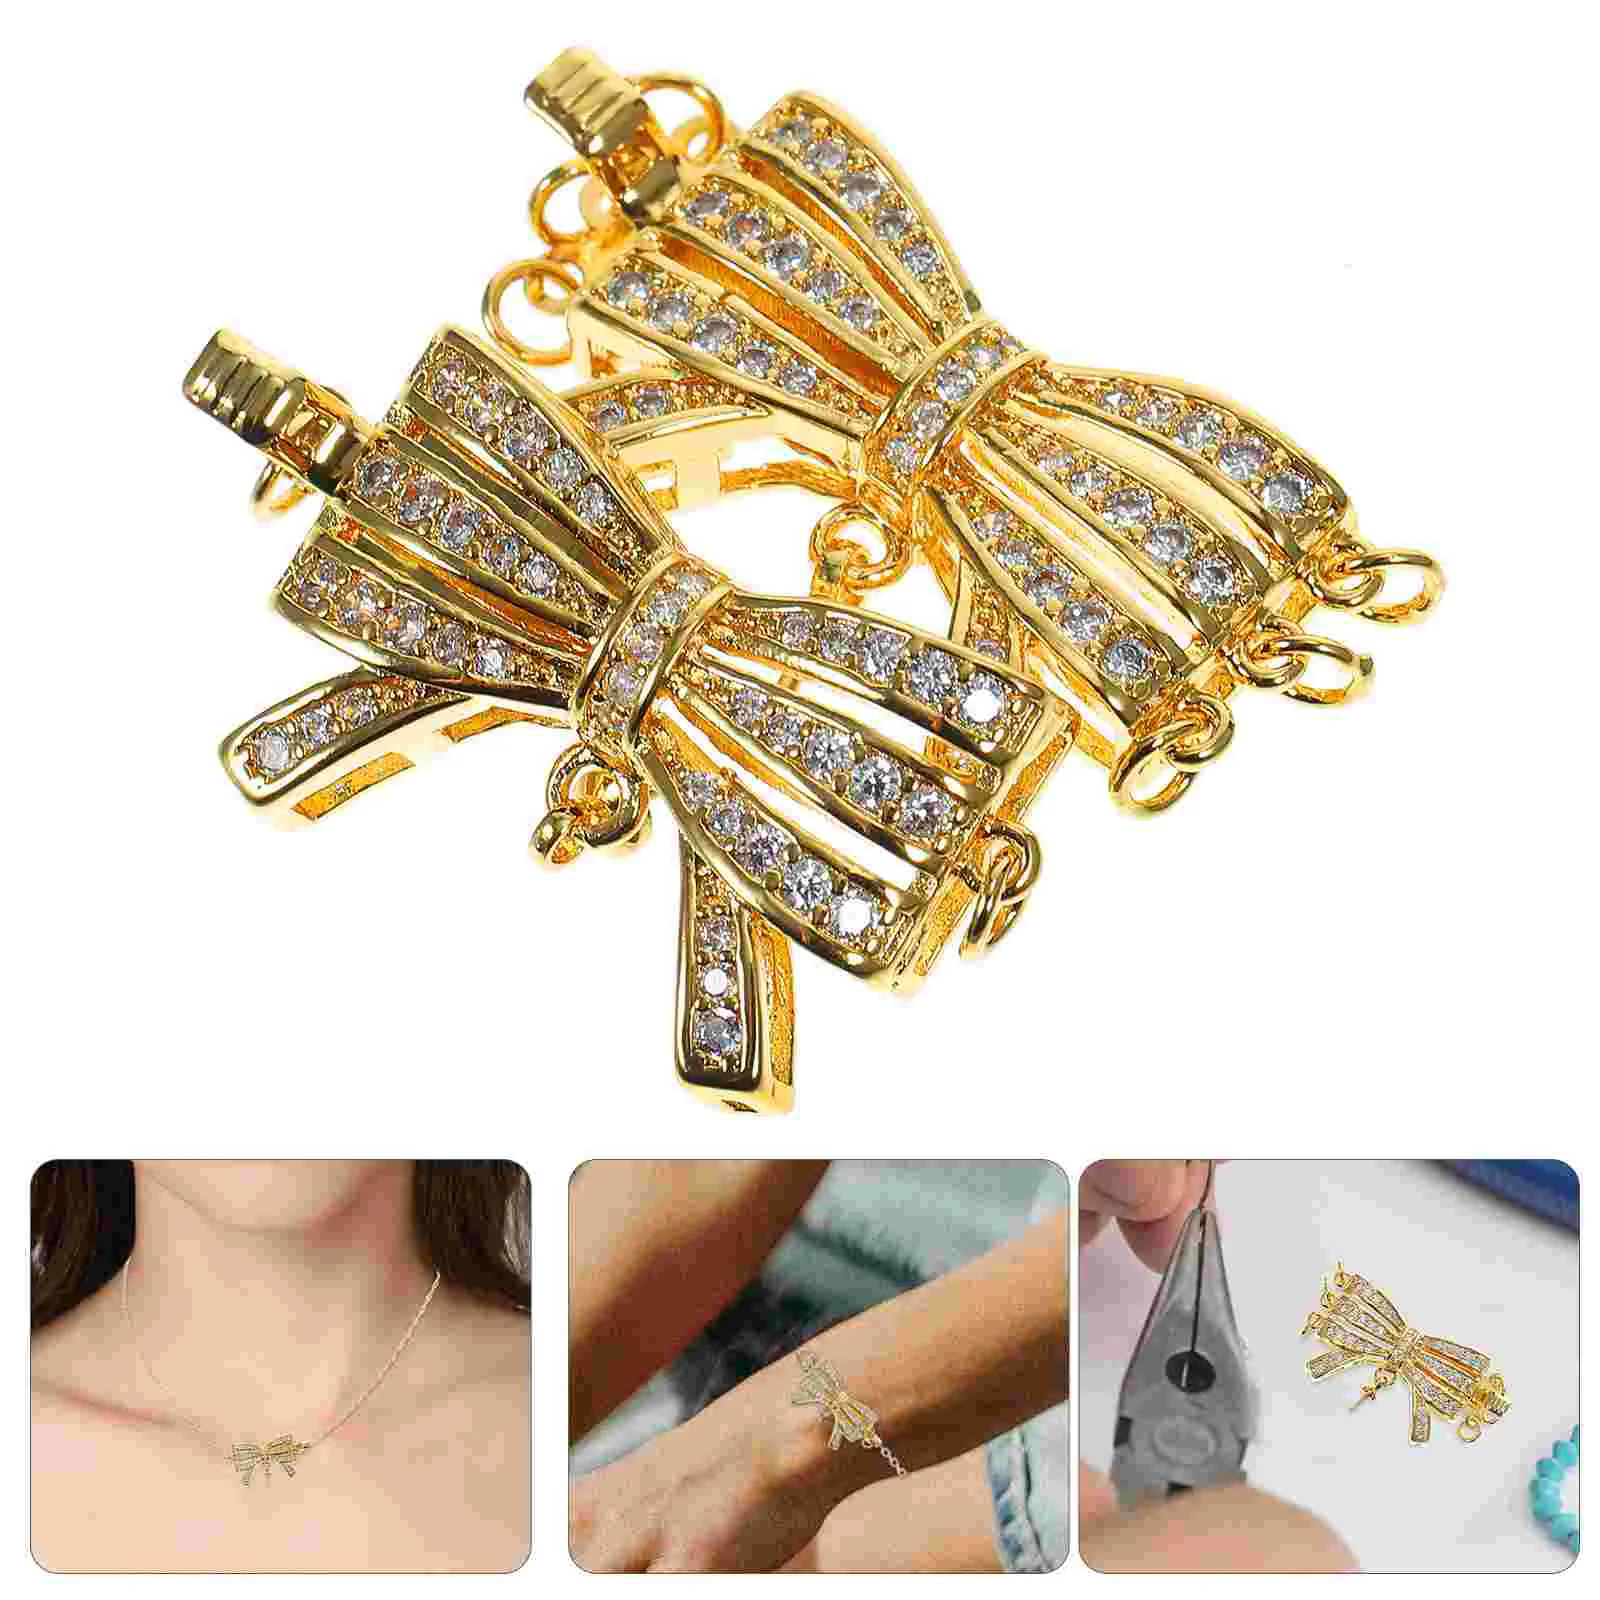 

10 Pcs Button Hand Chain Bracelet DIY Necklace Connectors Magnetic Bead Pendants Clasps Layered Look Alloy Separator Layering